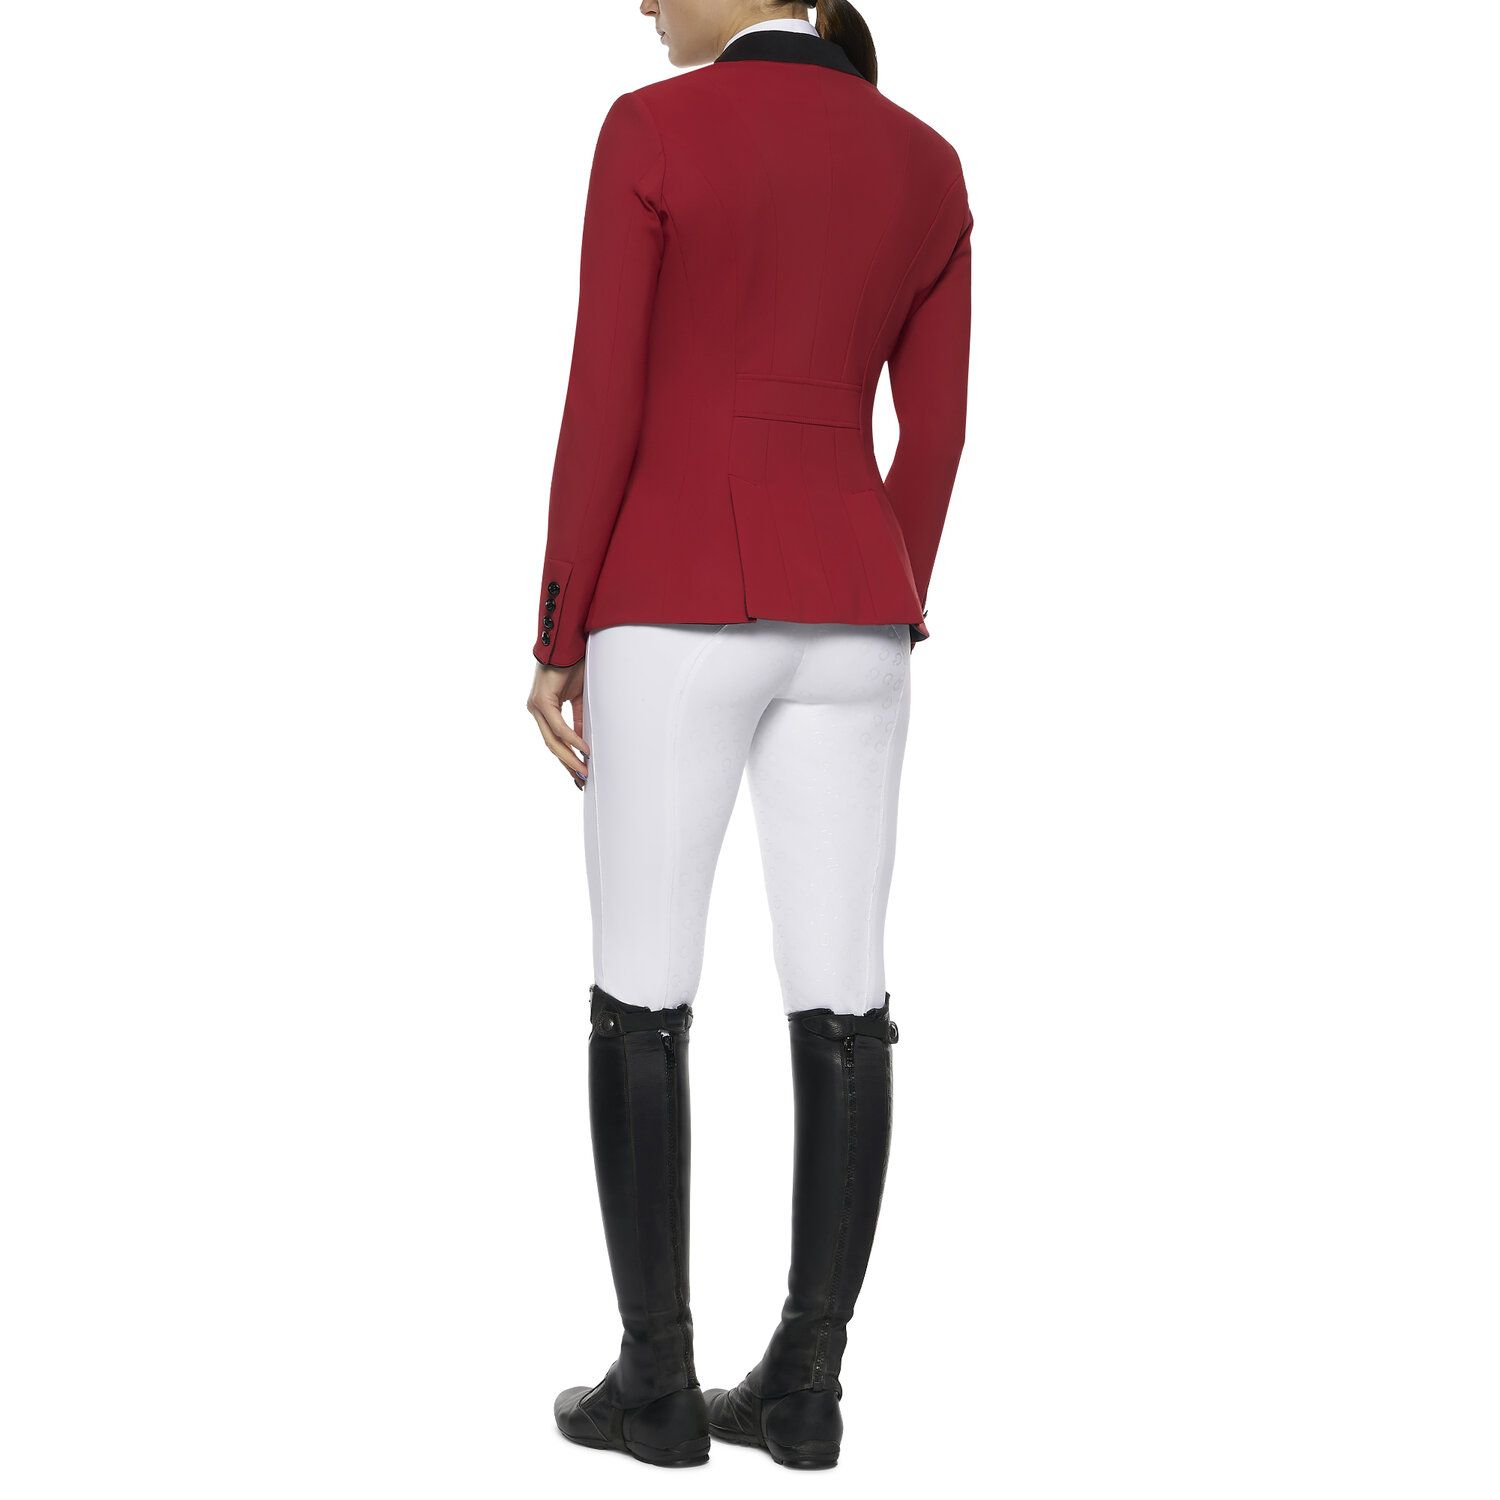 Cavalleria Toscana Women's competition riding jacket. RED-3